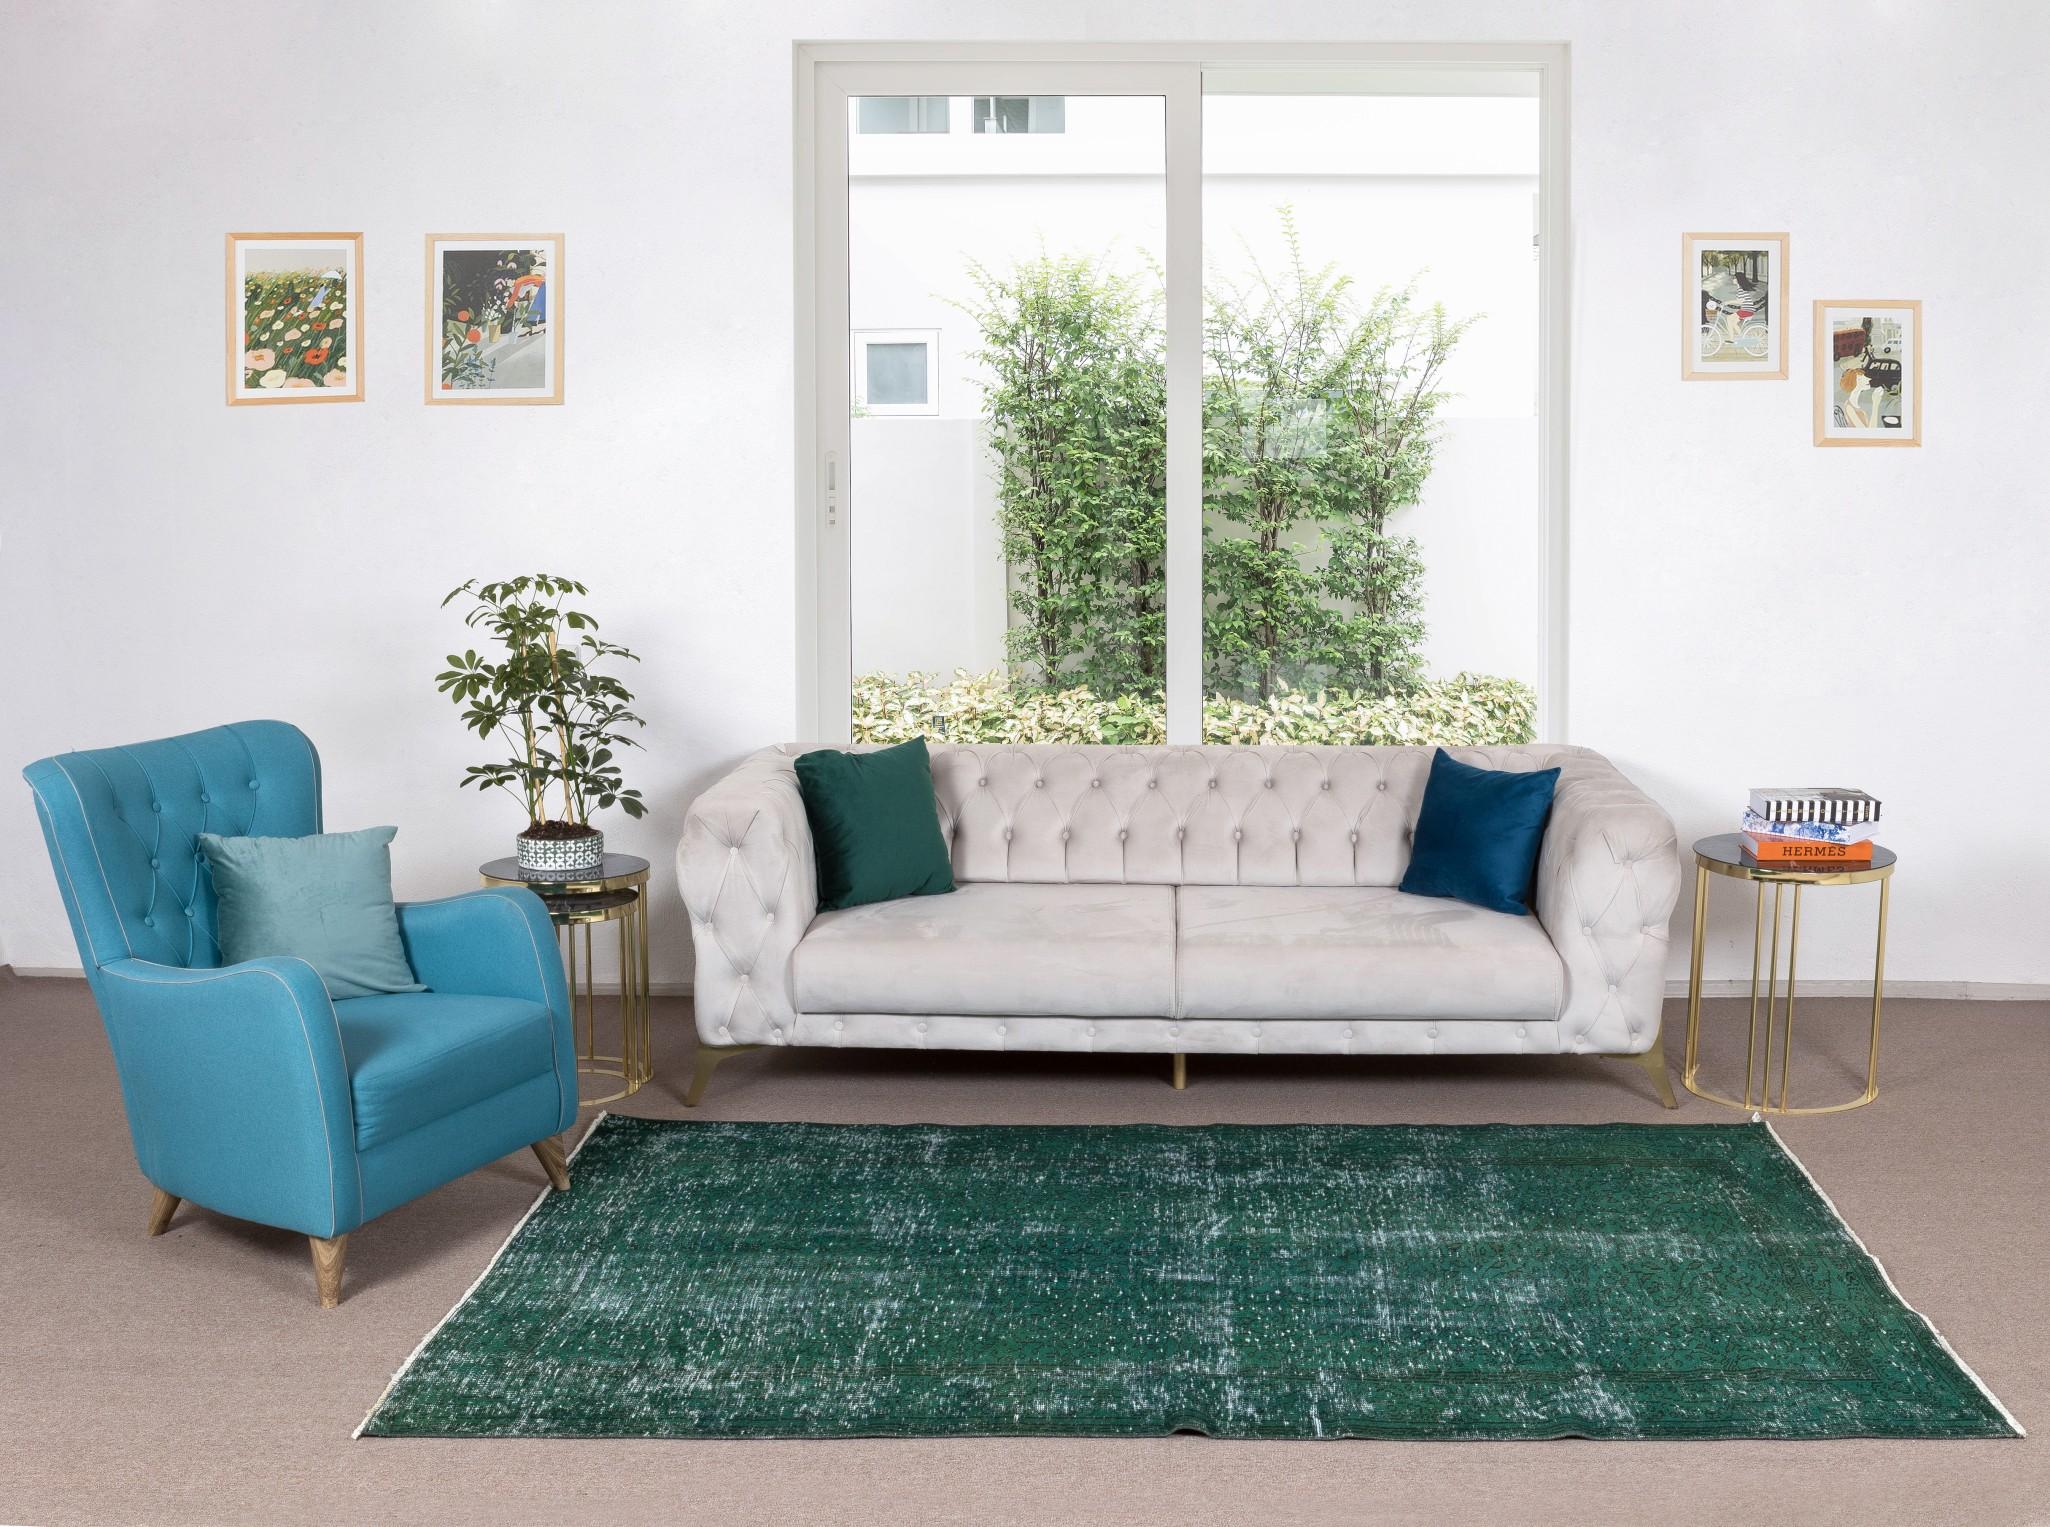 Our over-dyed rugs are all hand-knotted vintage pieces that are recreated in our workshop to cater to a wider range of interior design choices from modern to coastal, from industrial to rustic / cottage. These 50 to 70 year-old rugs were